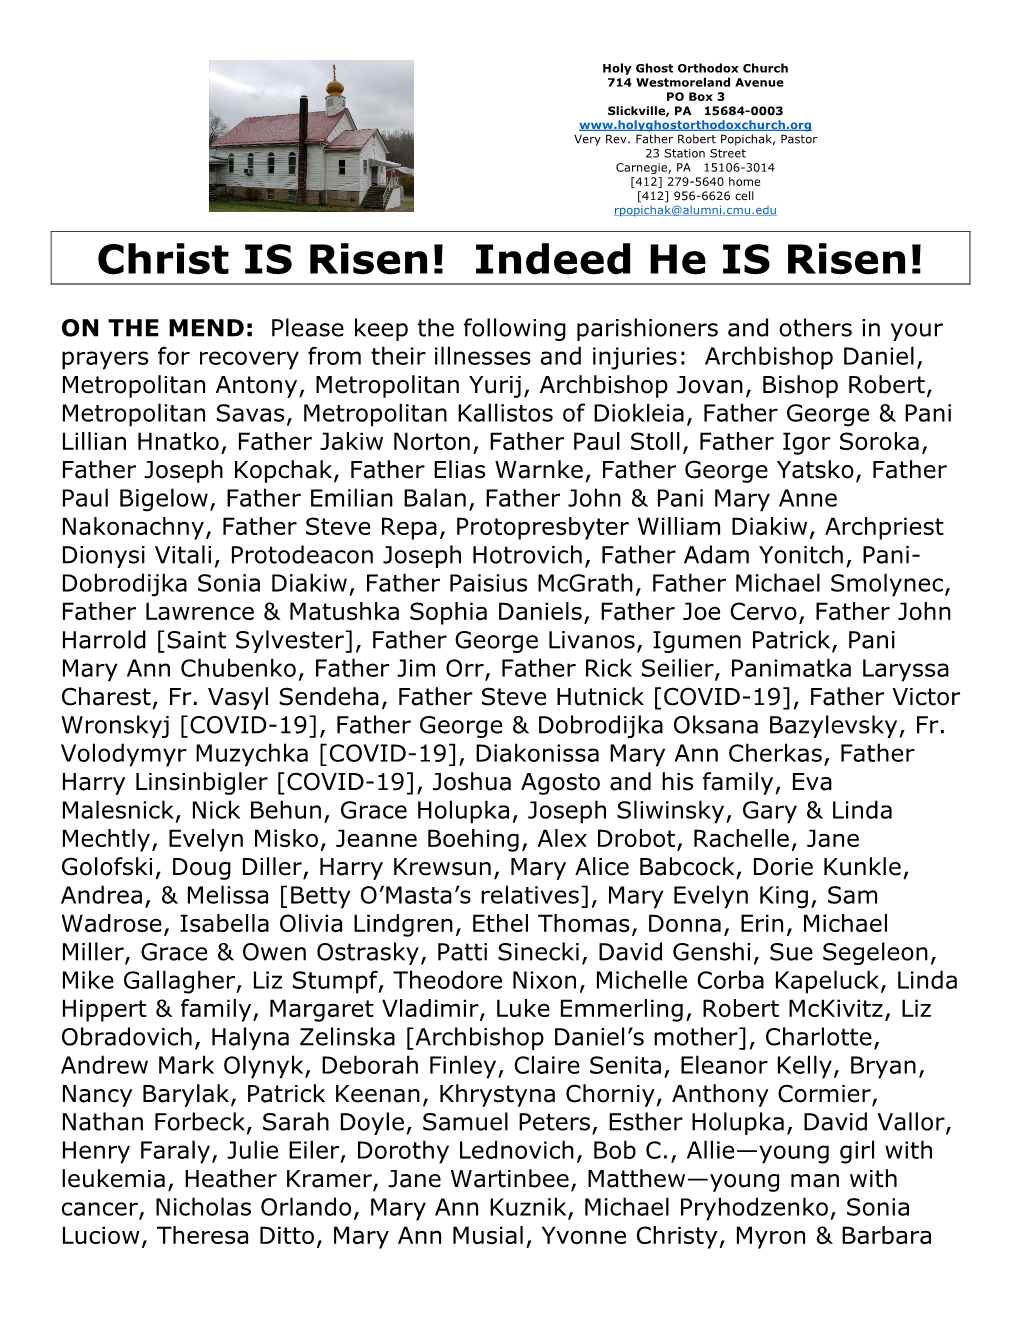 Christ IS Risen! Indeed He IS Risen!